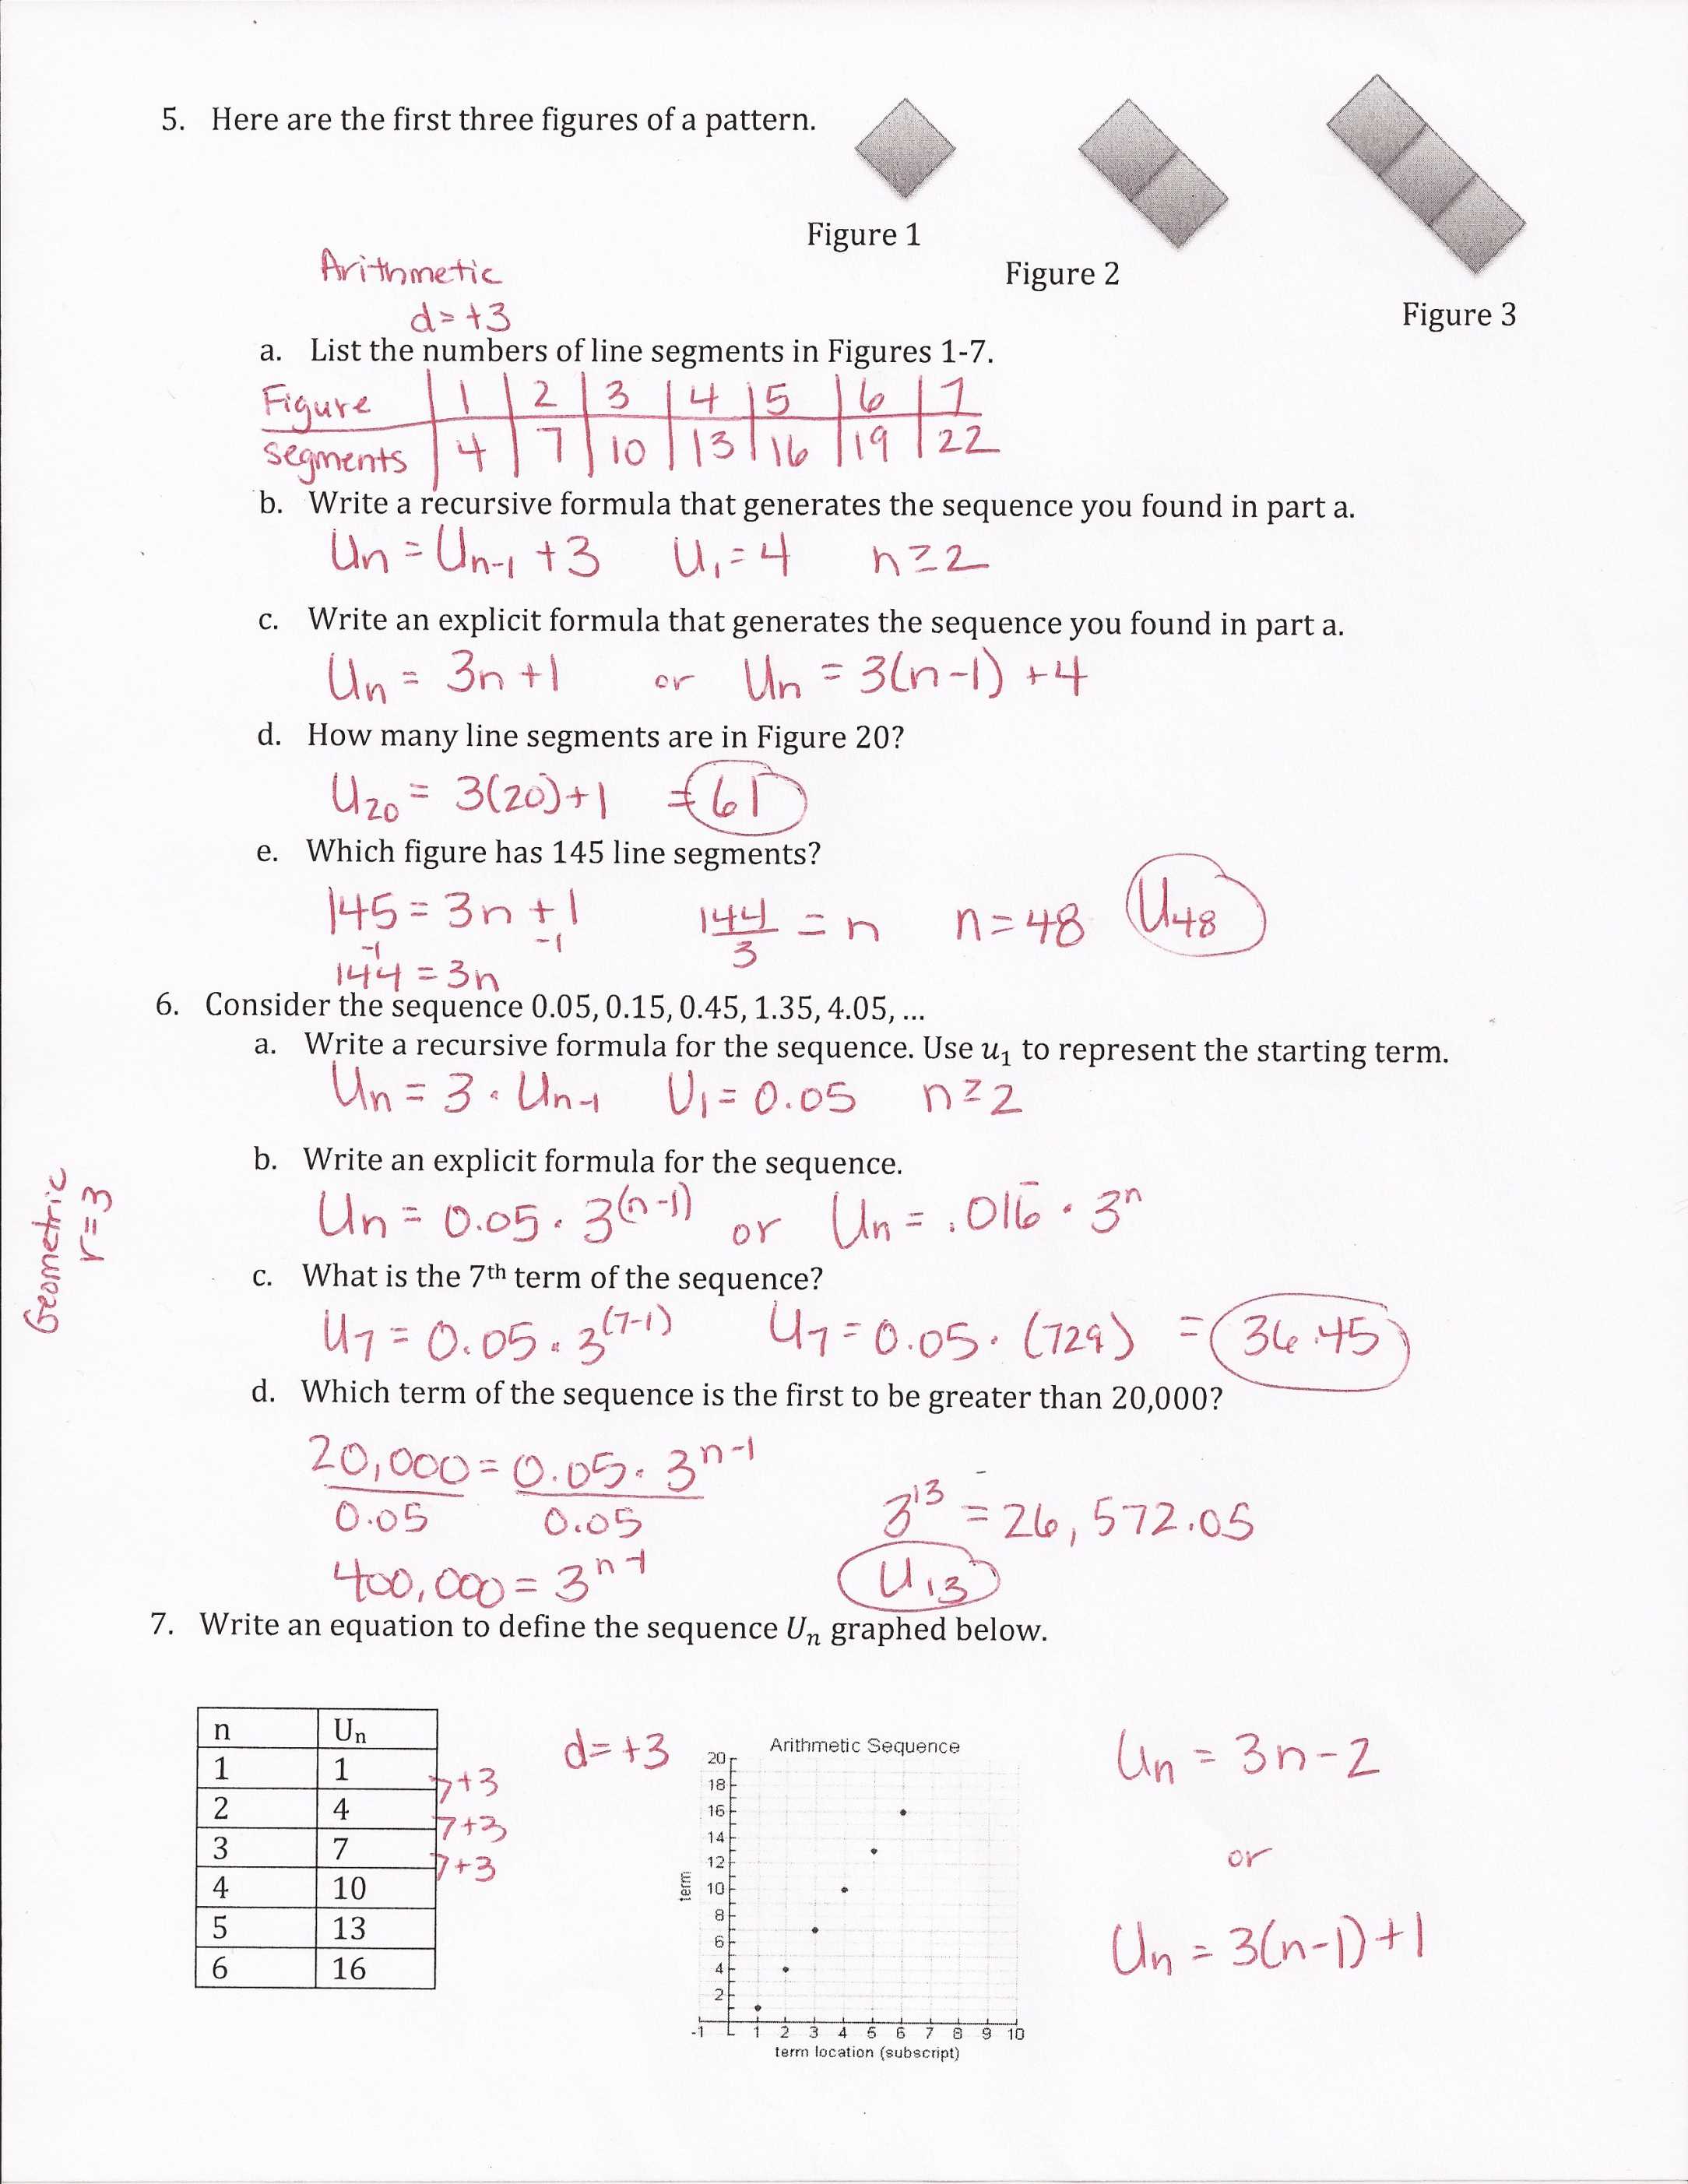 Arithmetic Sequence Worksheet Pdf as Well as Worksheet Arithmetic Sequences and Series Worksheet Idea Lovely